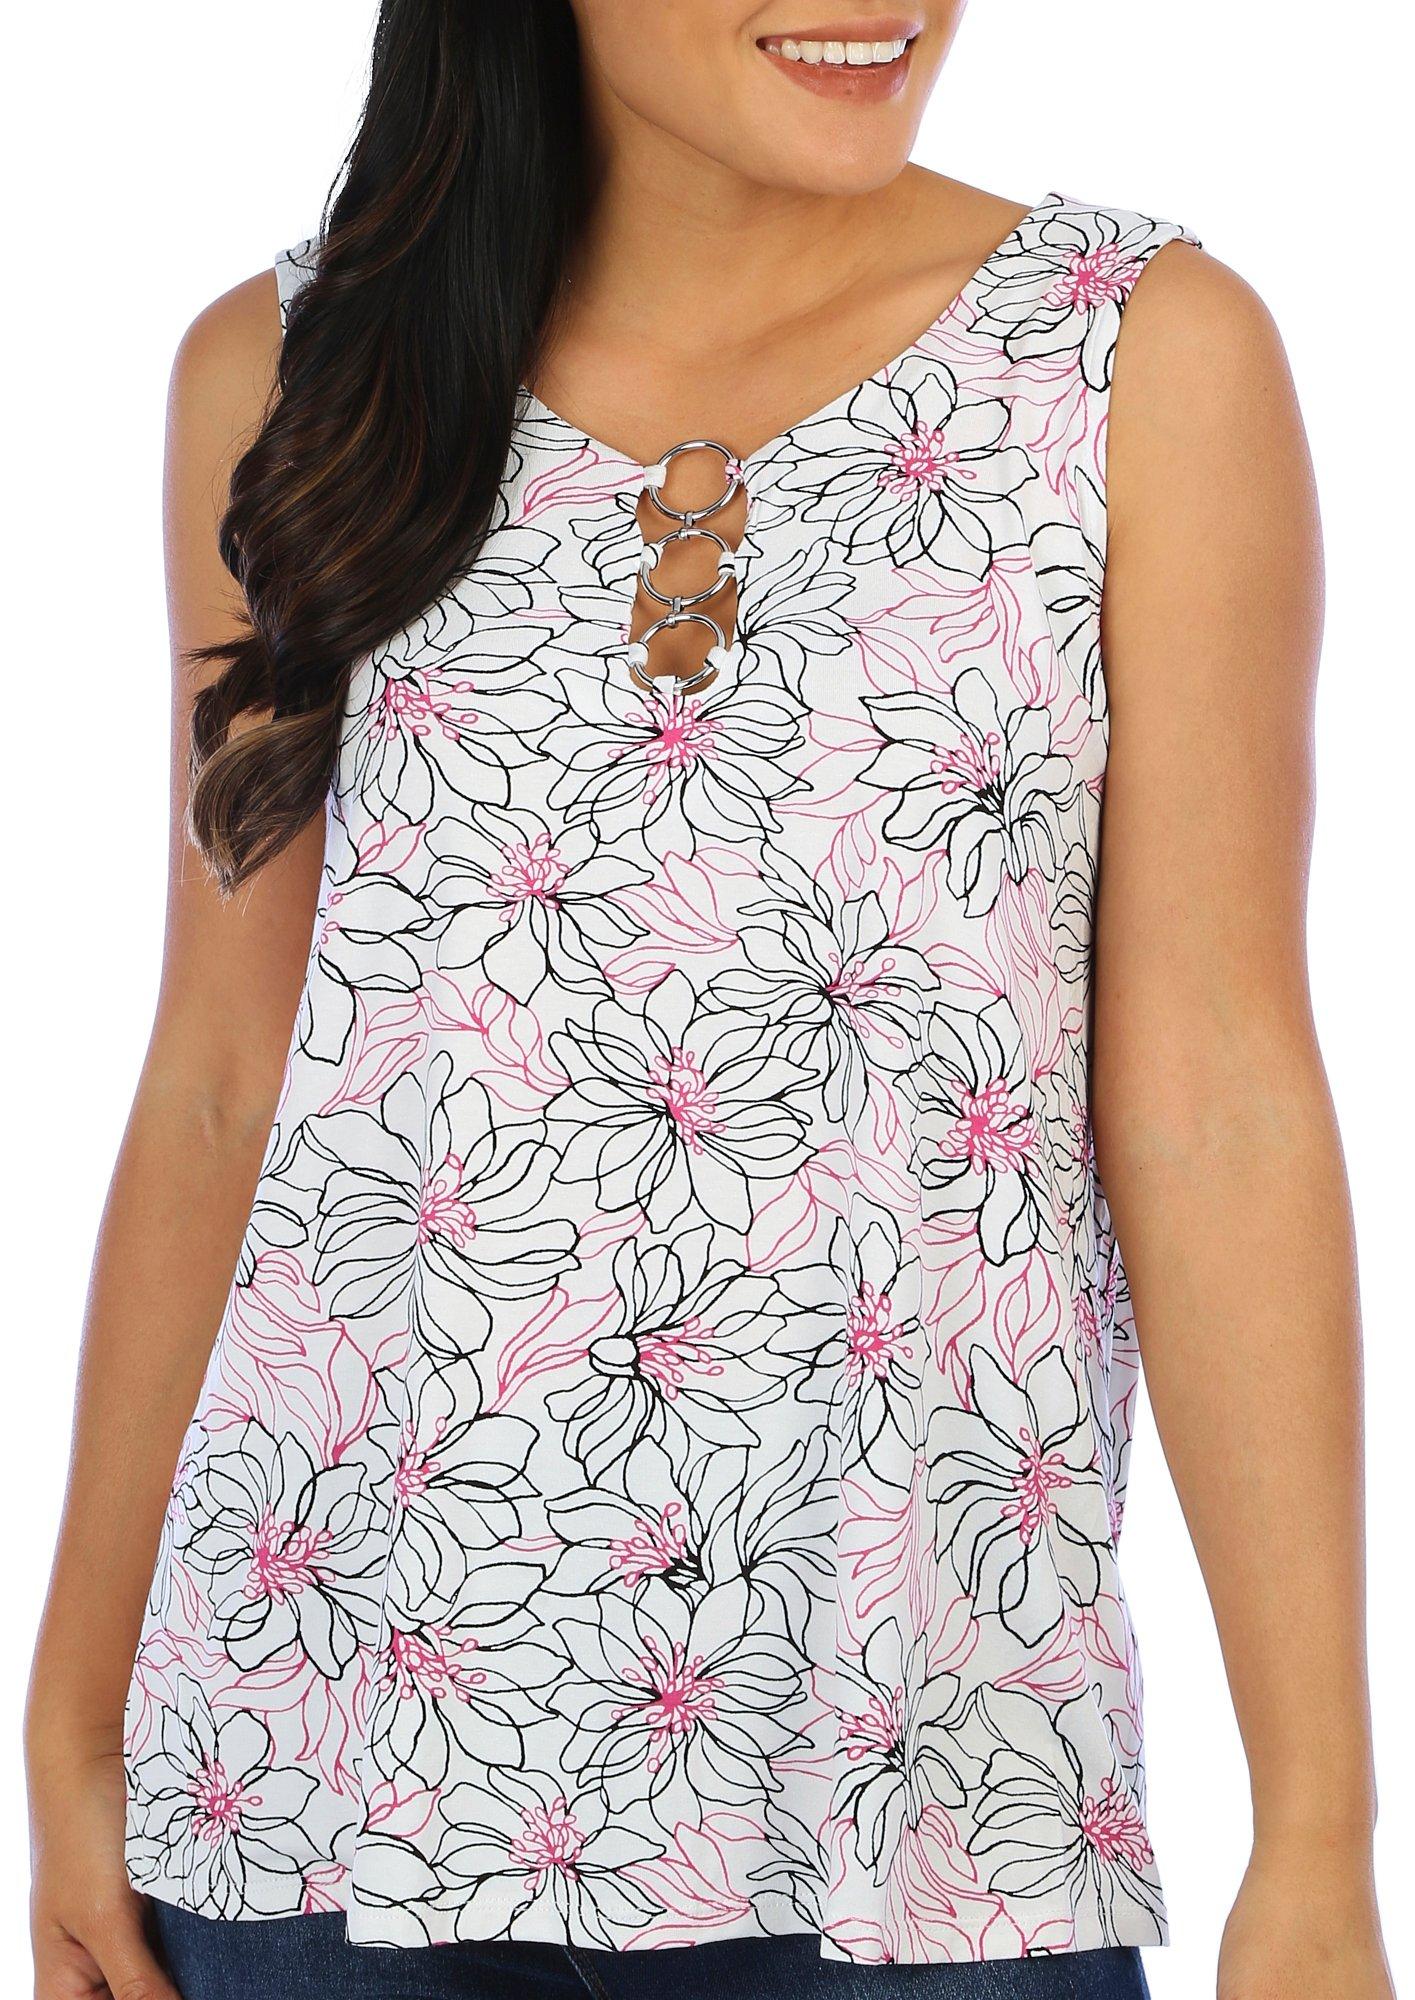 Juniper + Lime Womens Floral O-Ring Keyhole Sleeveless